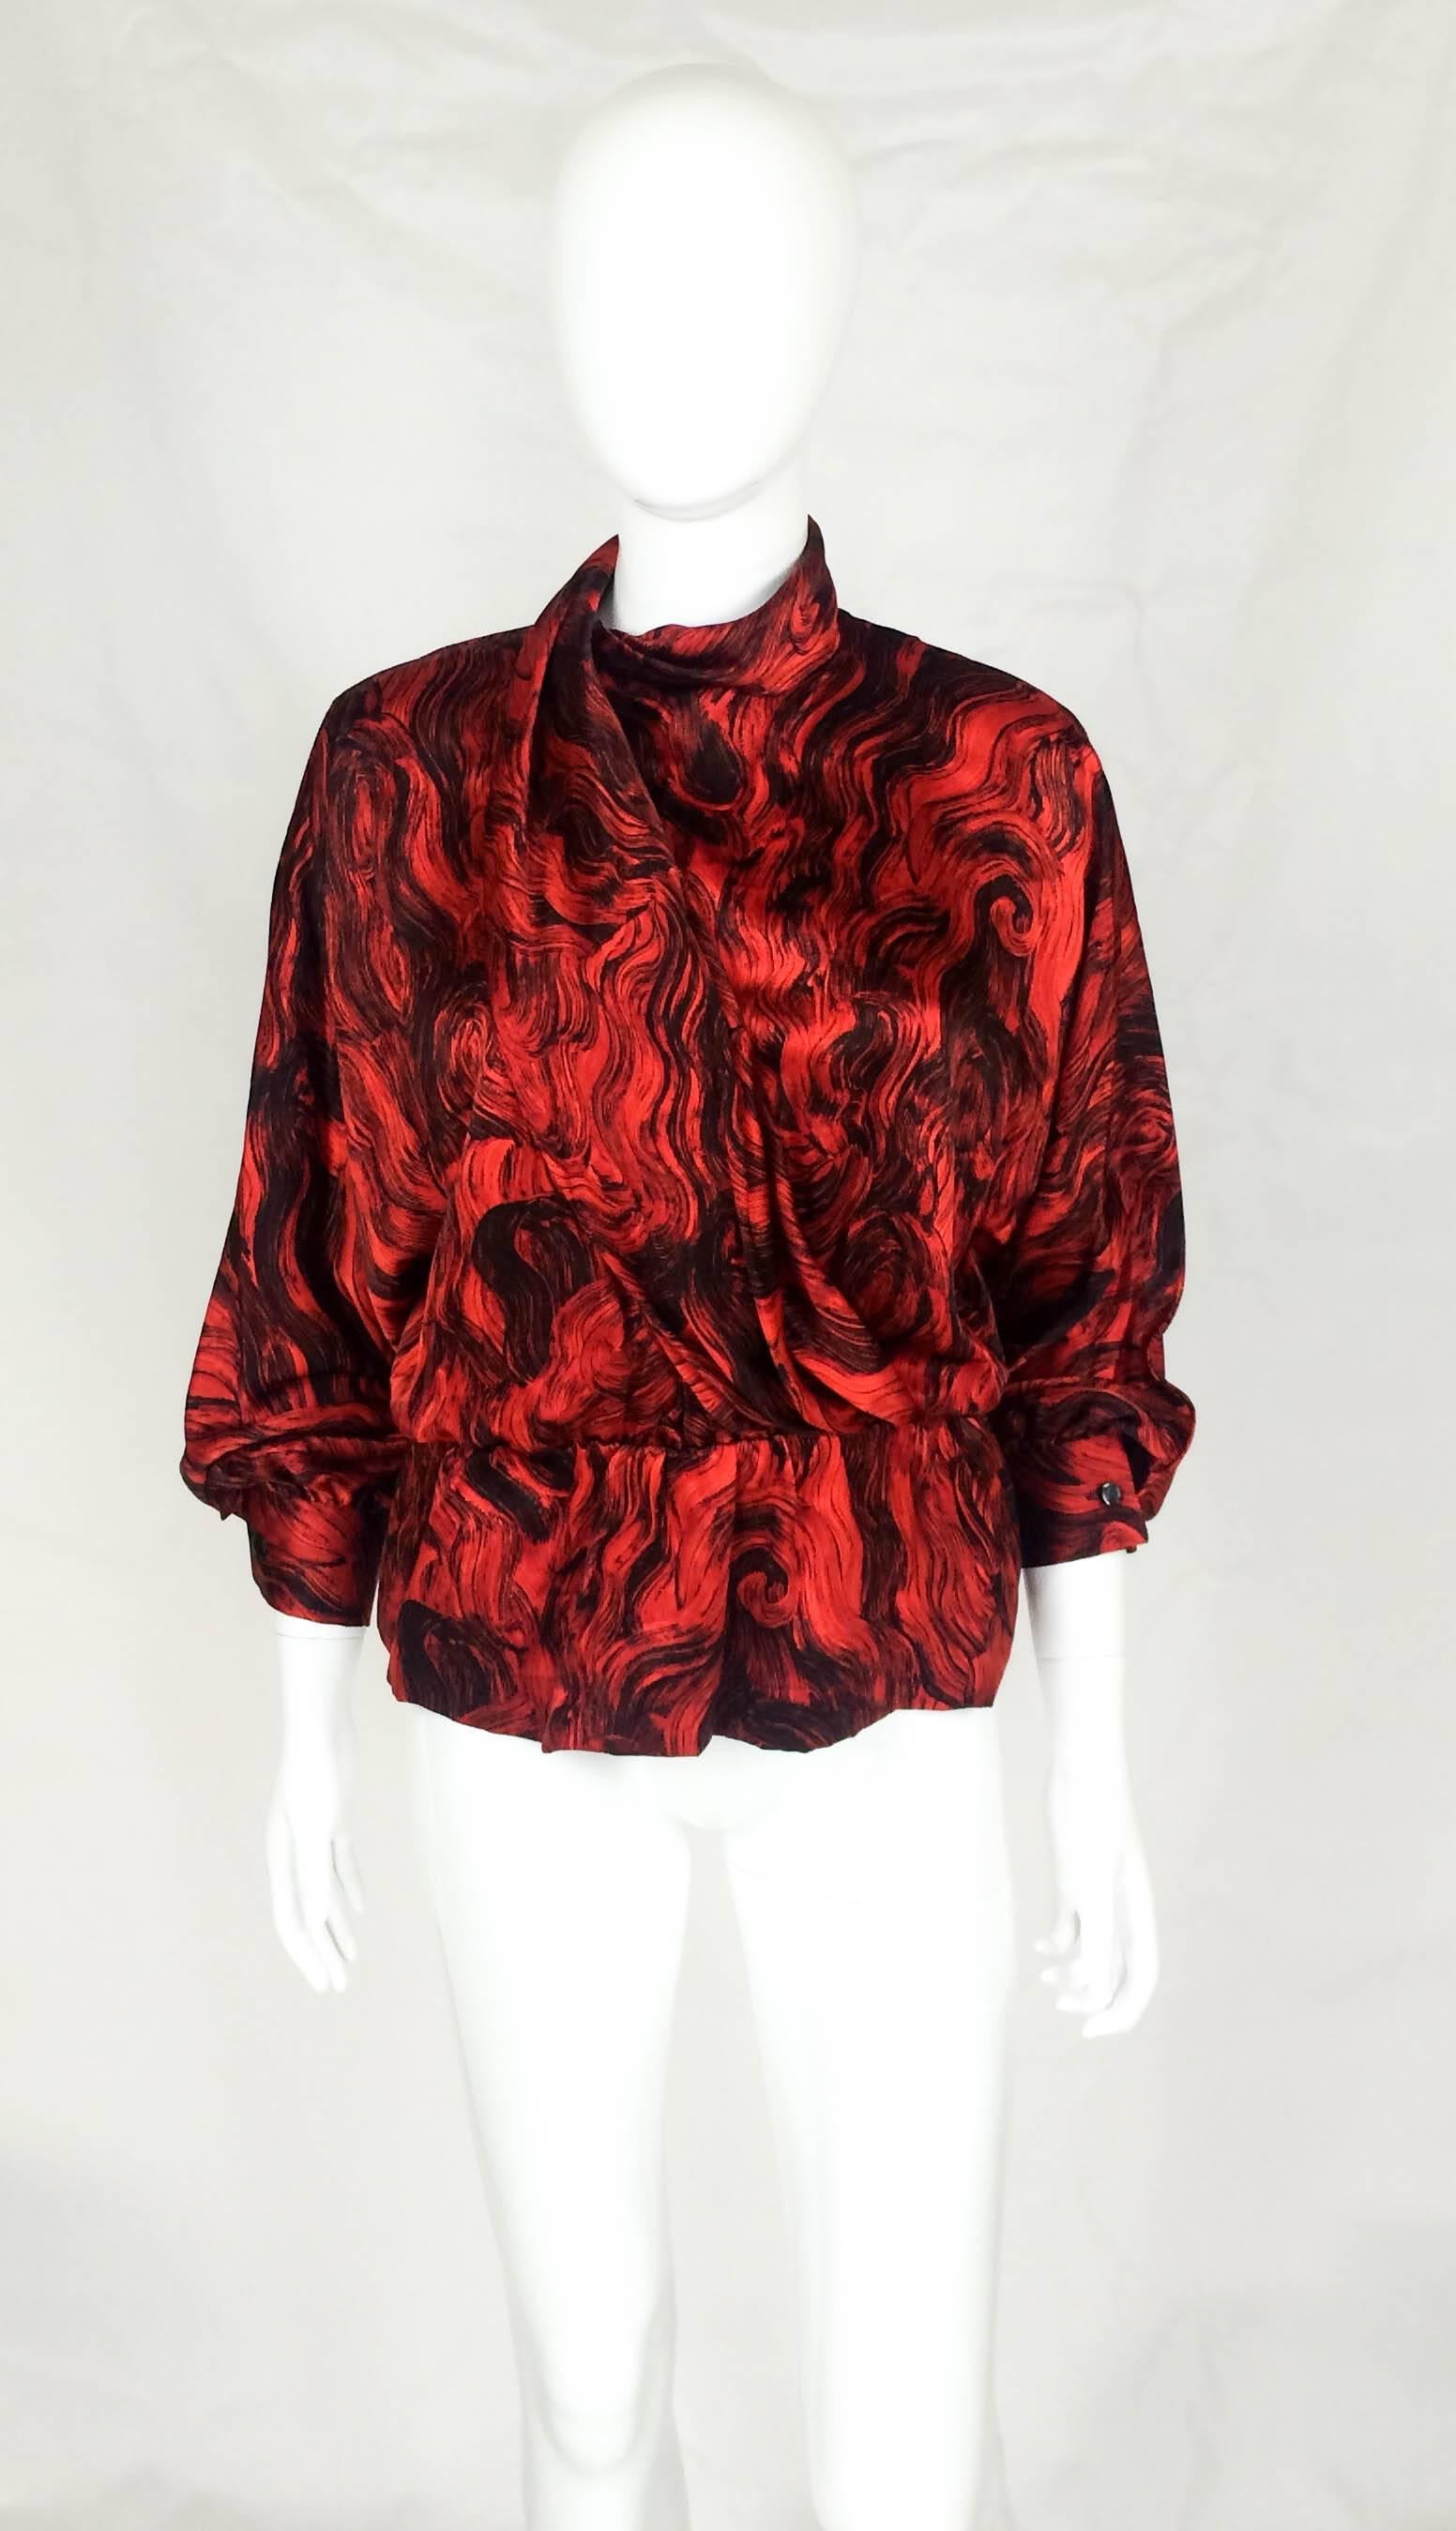 Vintage Pierre Cardin Silk Blouse. This beautiful blouse features a bold red and black abstract print, cowl collar and soft draping on the front. The waist is elasticated forming a peplum. This is an elegant and striking blouse by one of France’s